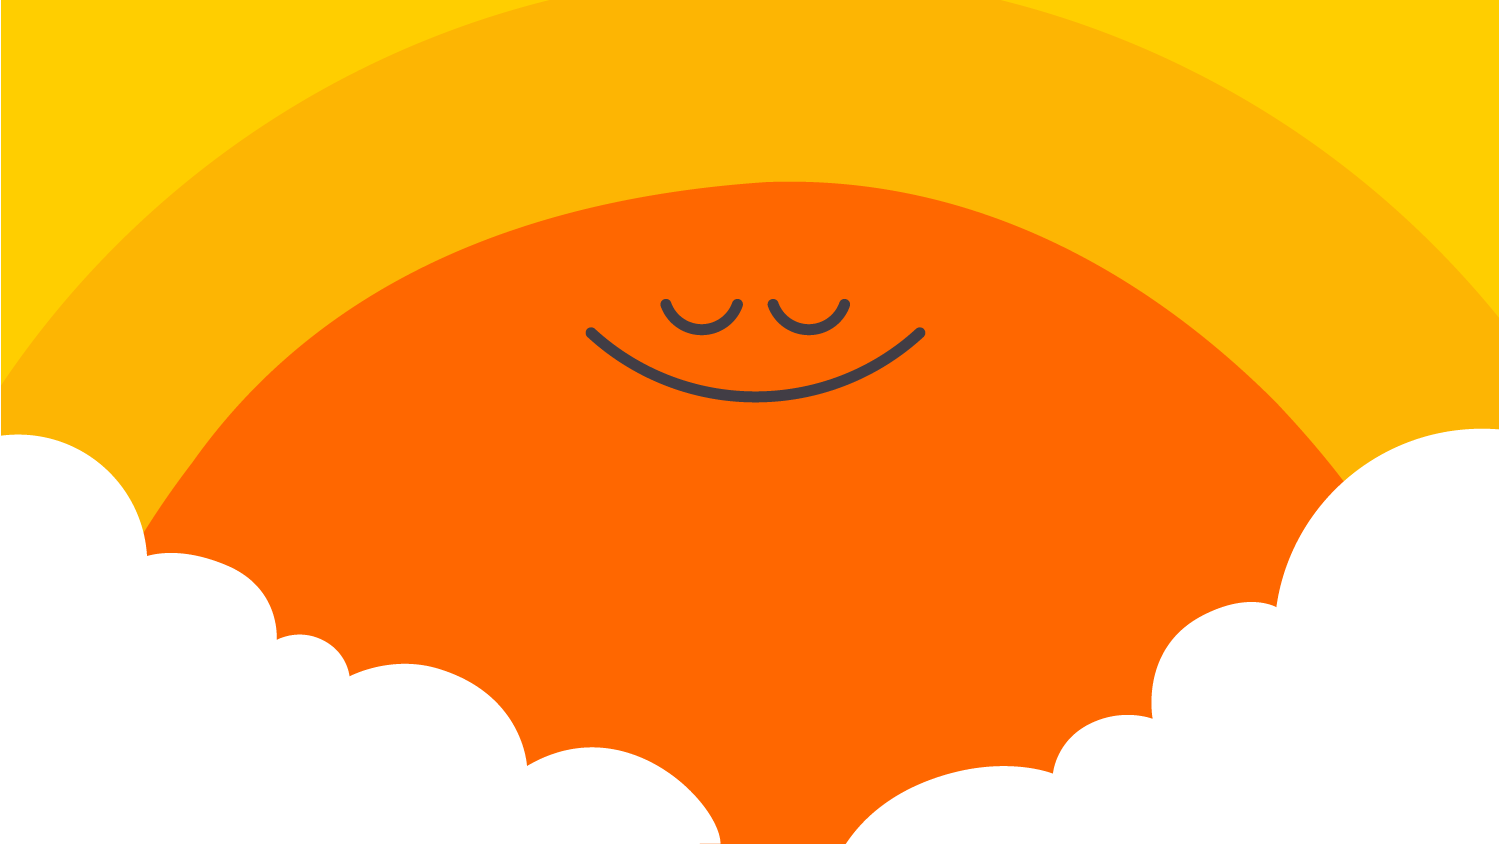 Headspace Web Banner with image of an orange sun smiling.